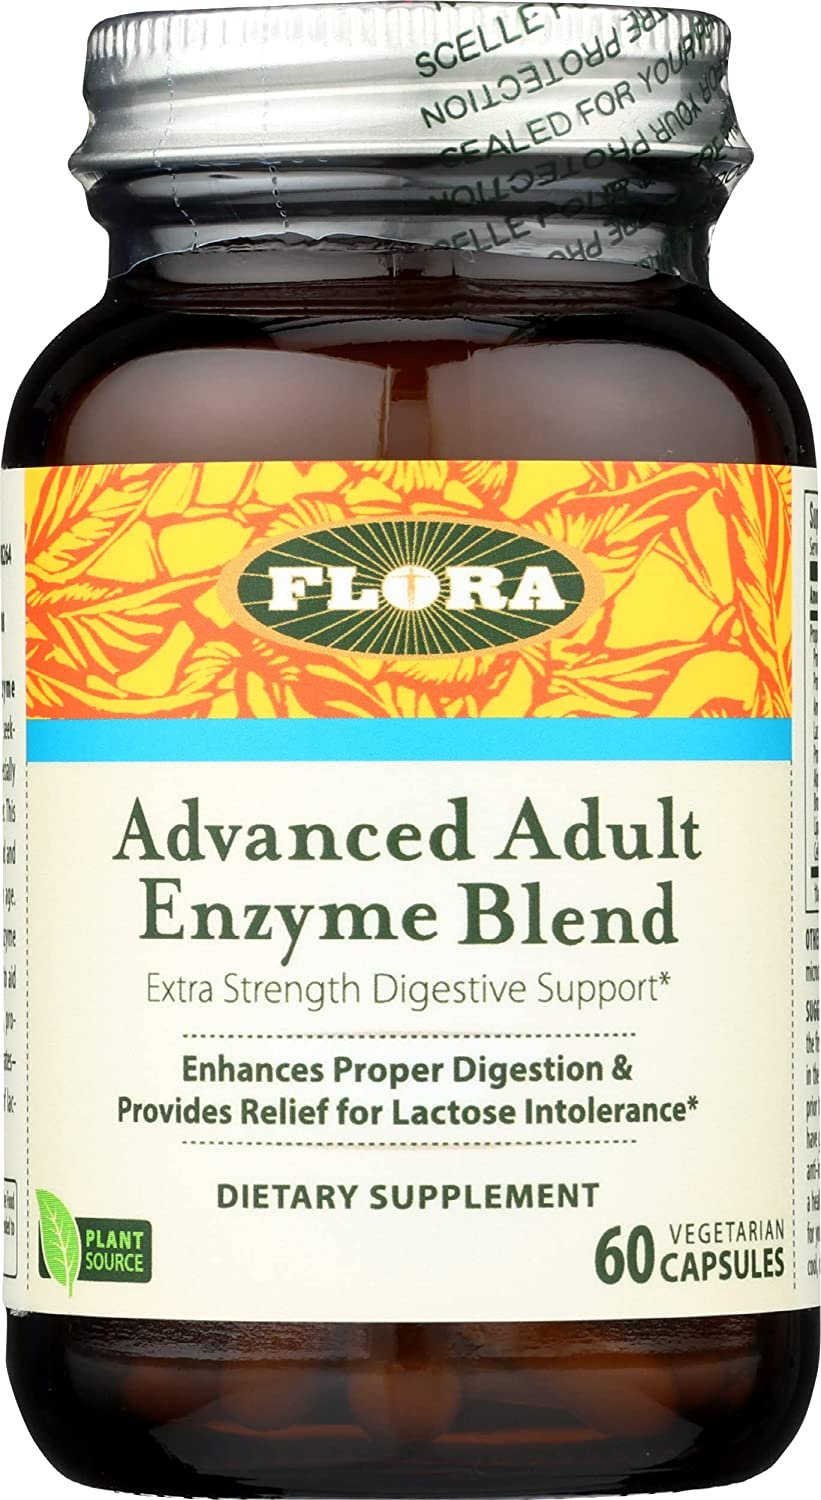 Flora - Advanced Adult Enzyme Blend with Lactase, Enhances Digestion & Provides Relief for Lactose Intolerance, Gluten-Free, Non GMO, 60 Vegetarian Capsules